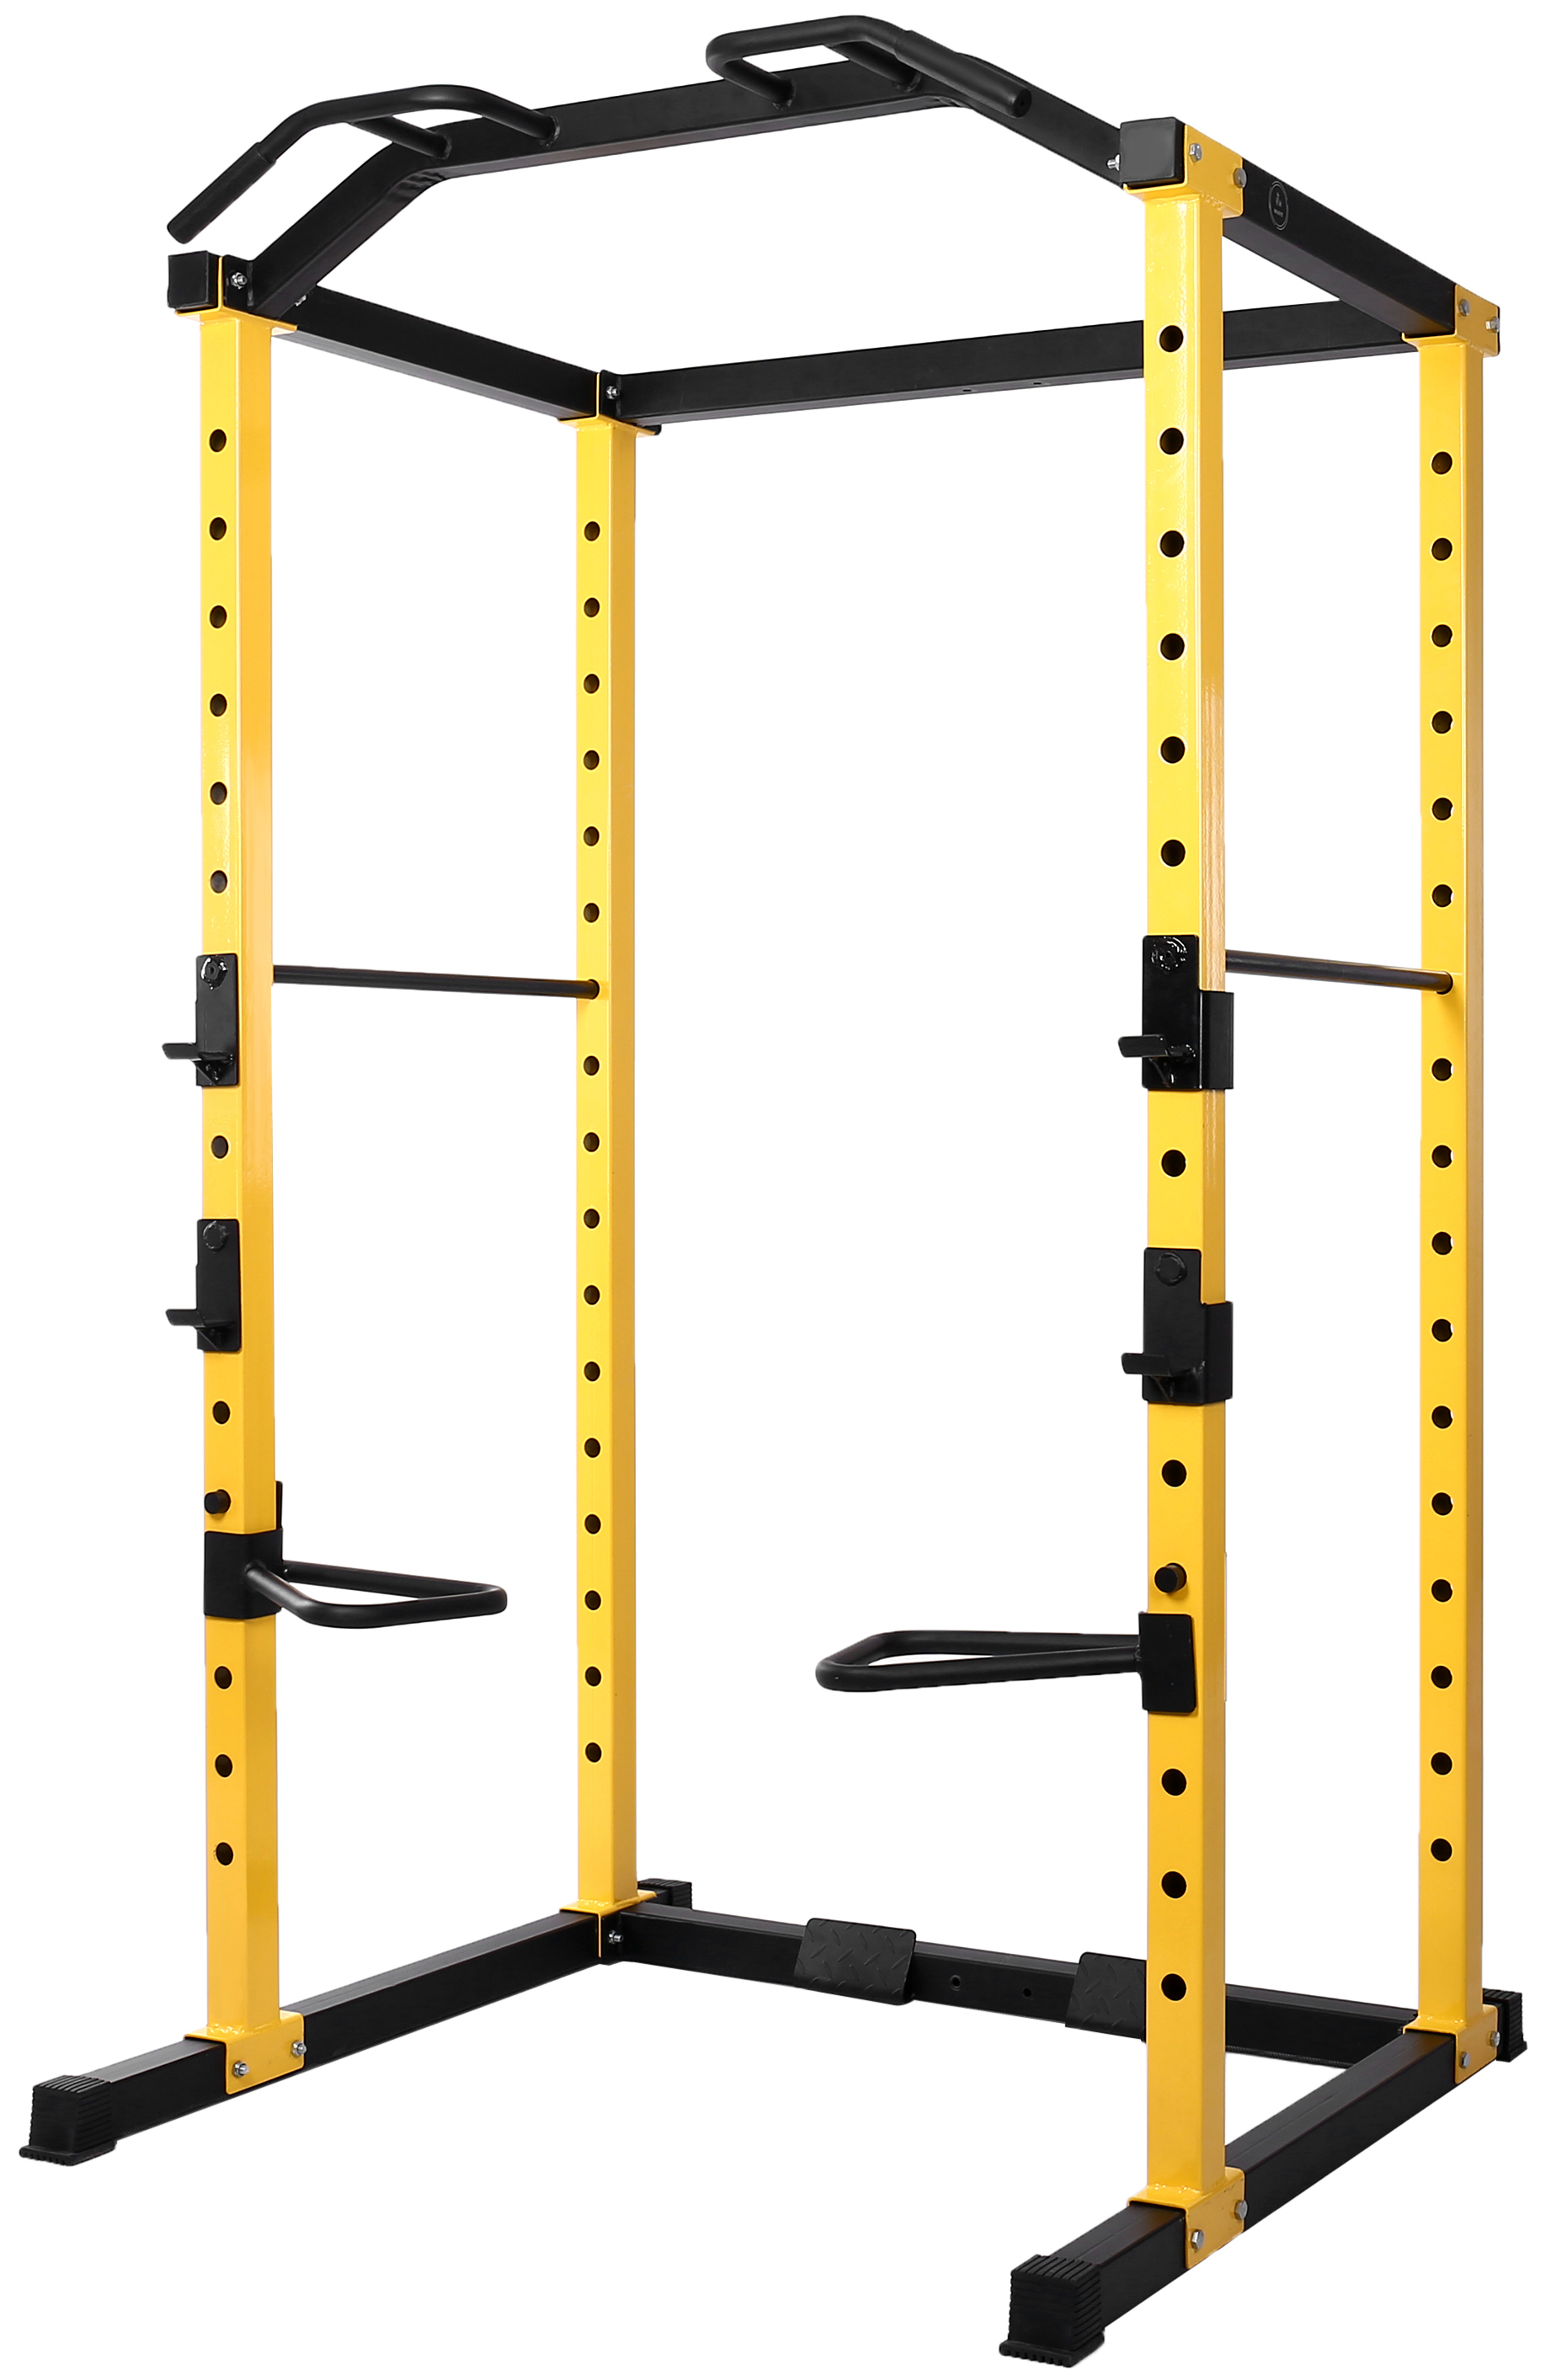 HulkFit Multi-Function Adjustable Power Cage with J-Hooks, Safety Bars or Safety Straps, Power Cage Only, Yellow - image 1 of 5